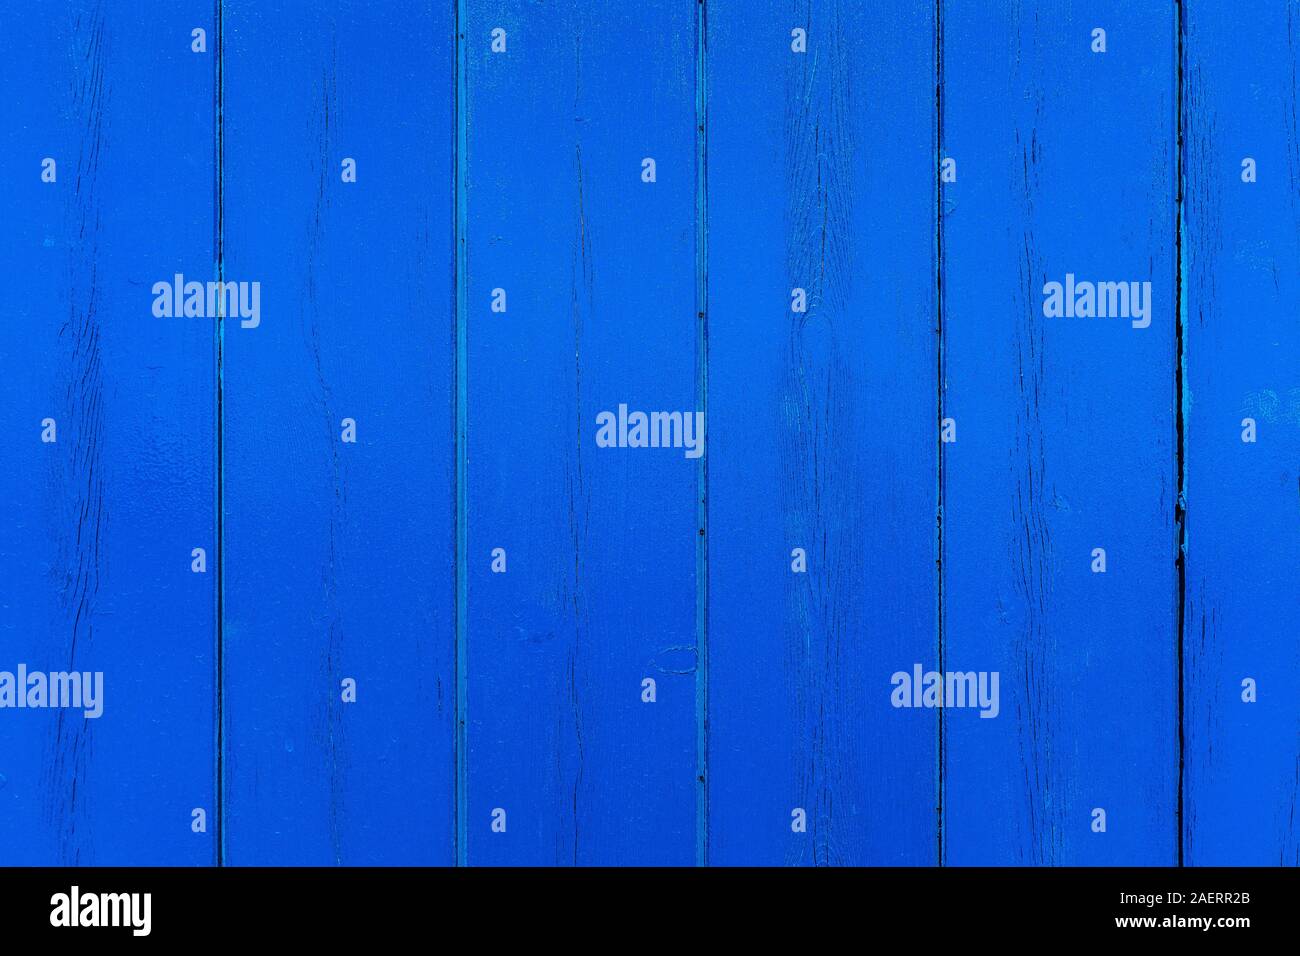 Close-up of an exterior wooden wall. Blue painted wooden planks with knots and vertical cracked. Backgrounds and textures. Copy space for text. Stock Photo